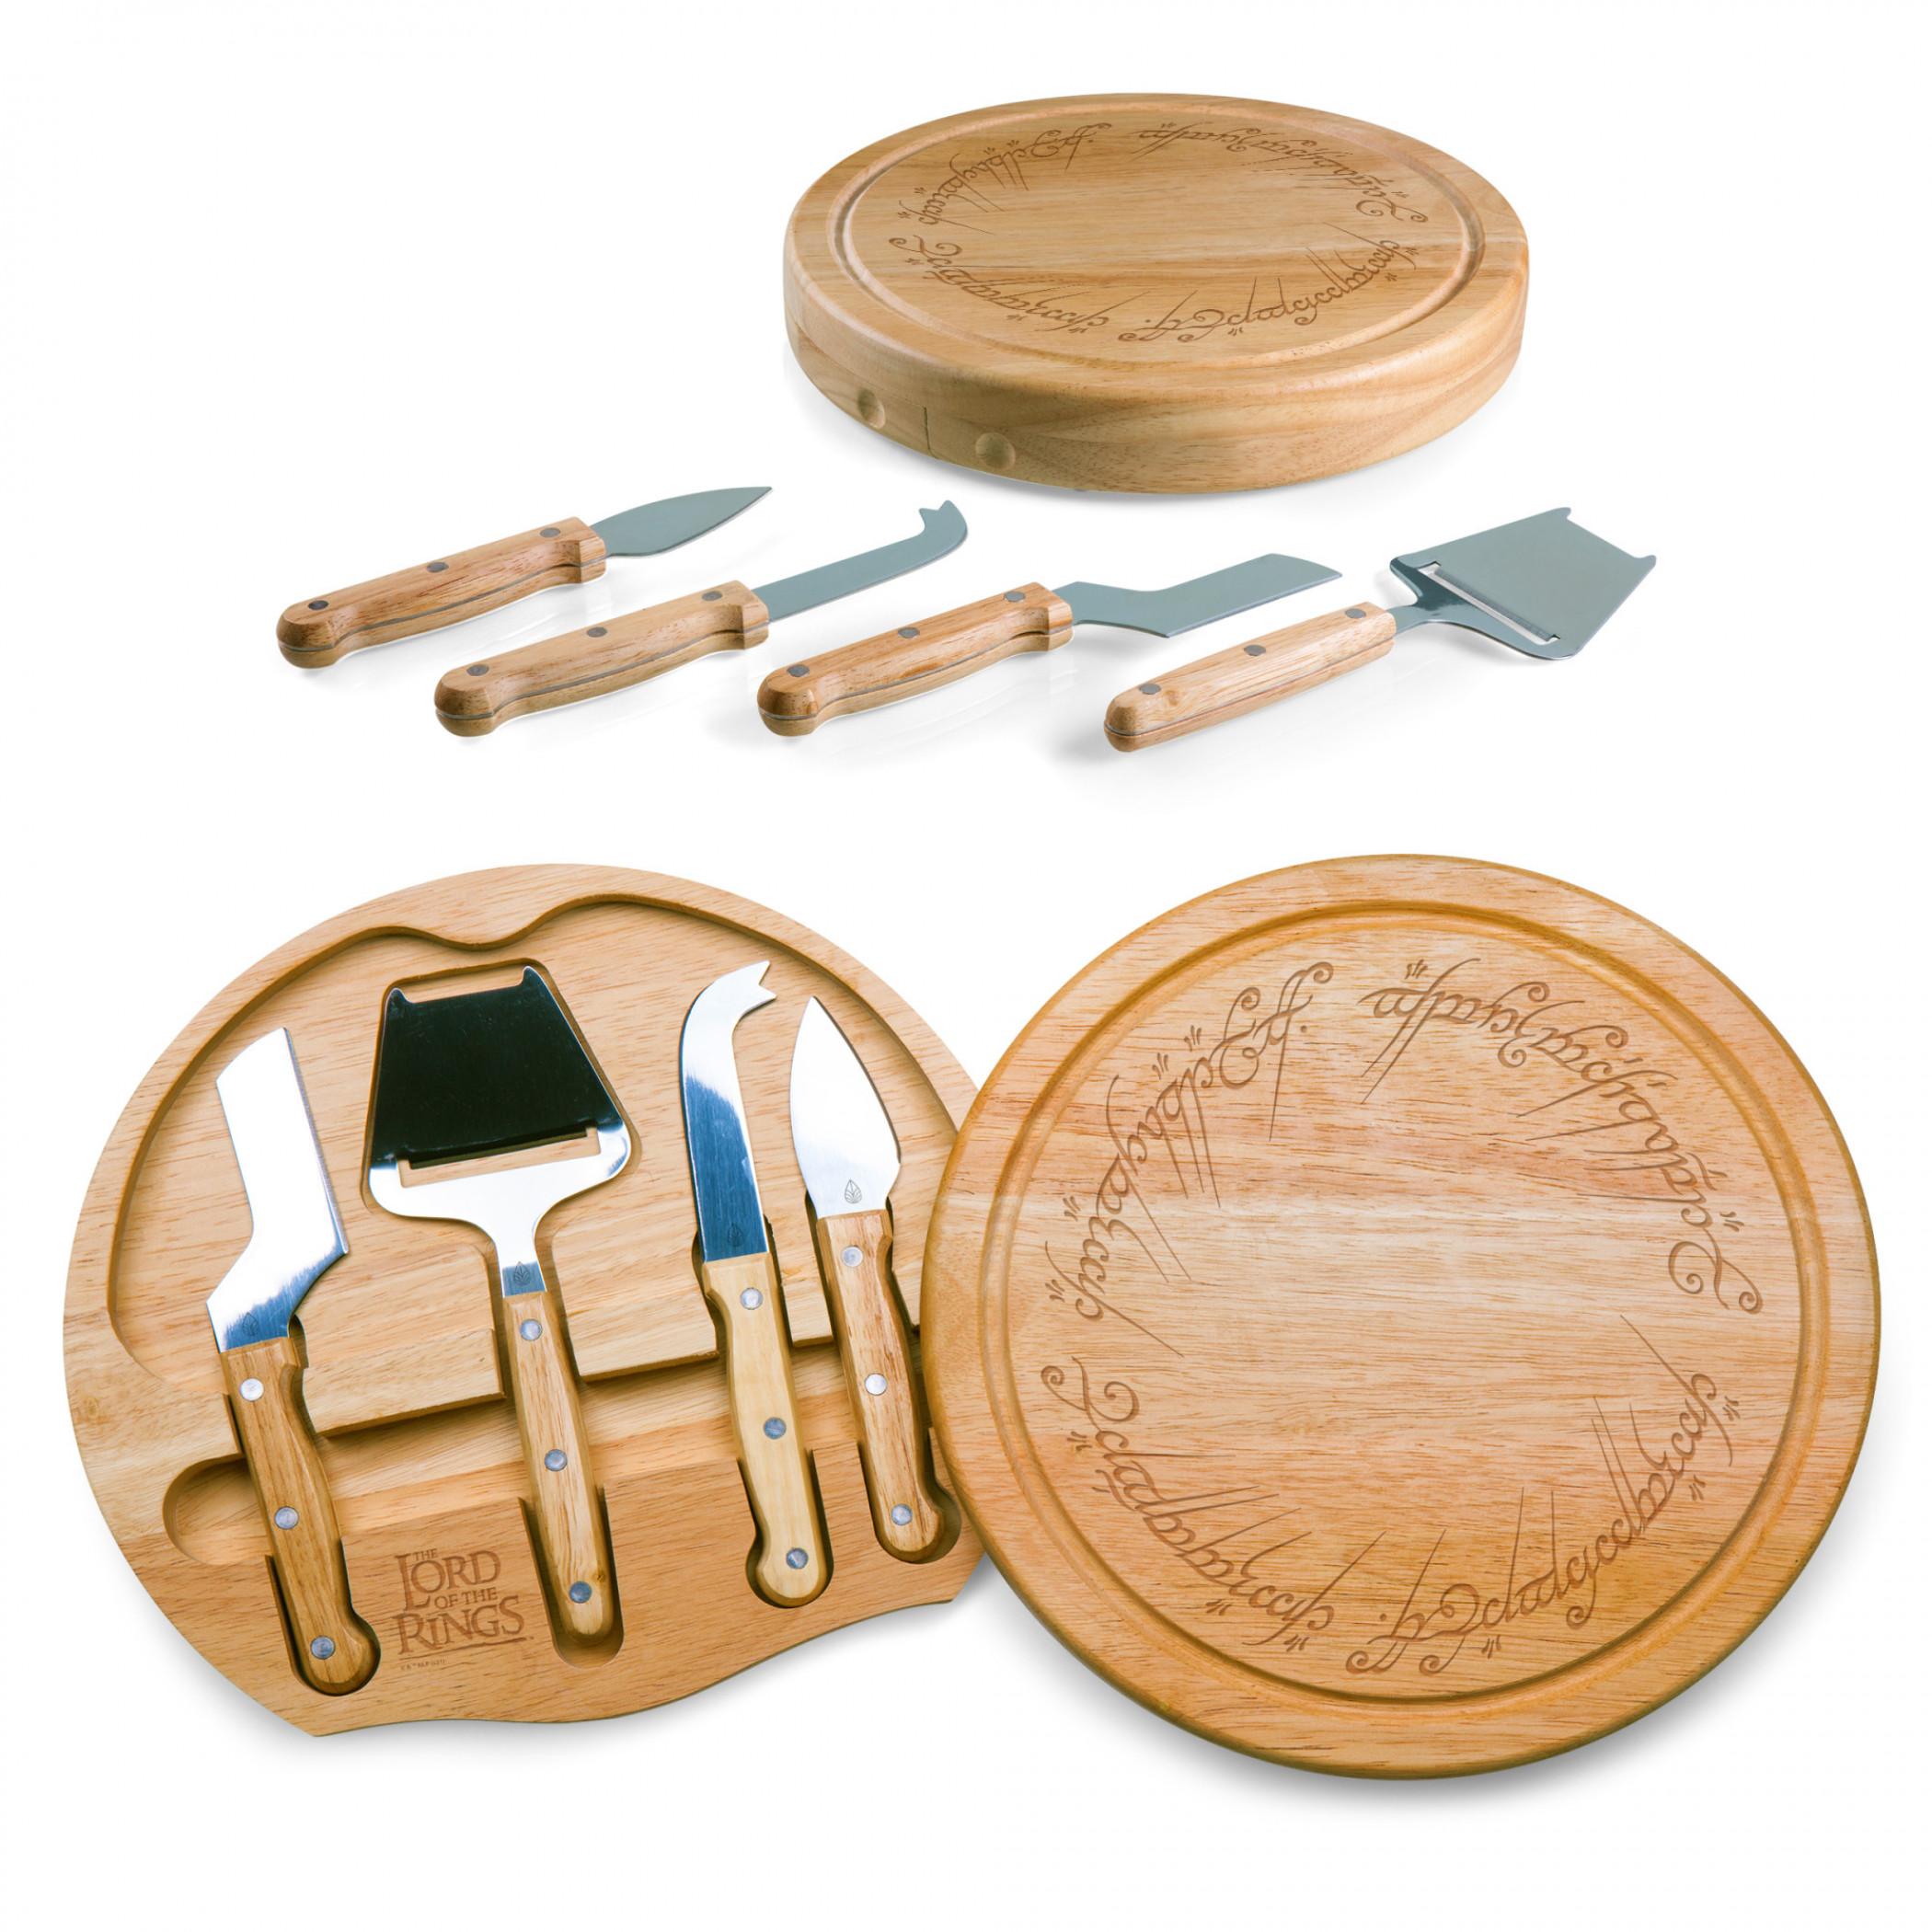 Lord of the Rings Circo Cheese Wooden Cutting Board & Tools Set